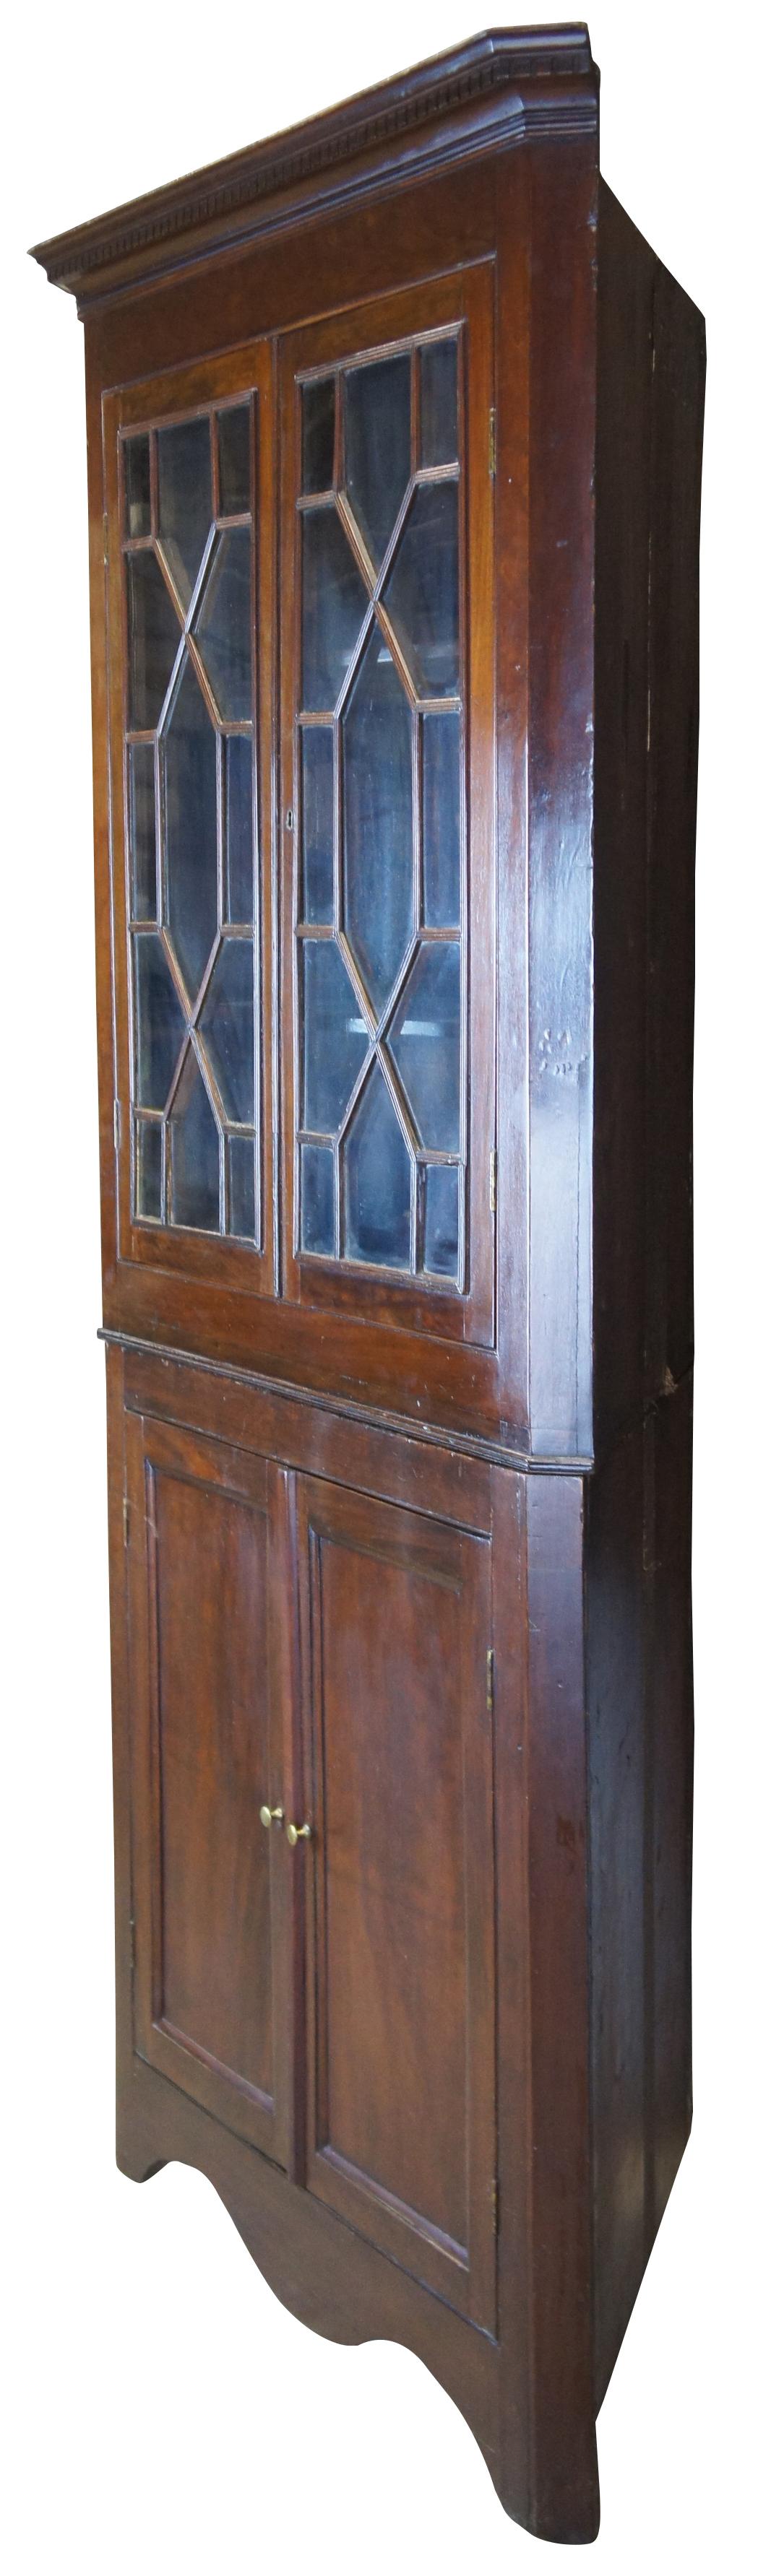 Antique English George III corner cabinet or cupboard. Made of mahogany featuring upper dentil moulding, glazed doors with geometric astragals, that opens to three shelves atop lower cabinet with serpentine skirted base.

Measures: 40